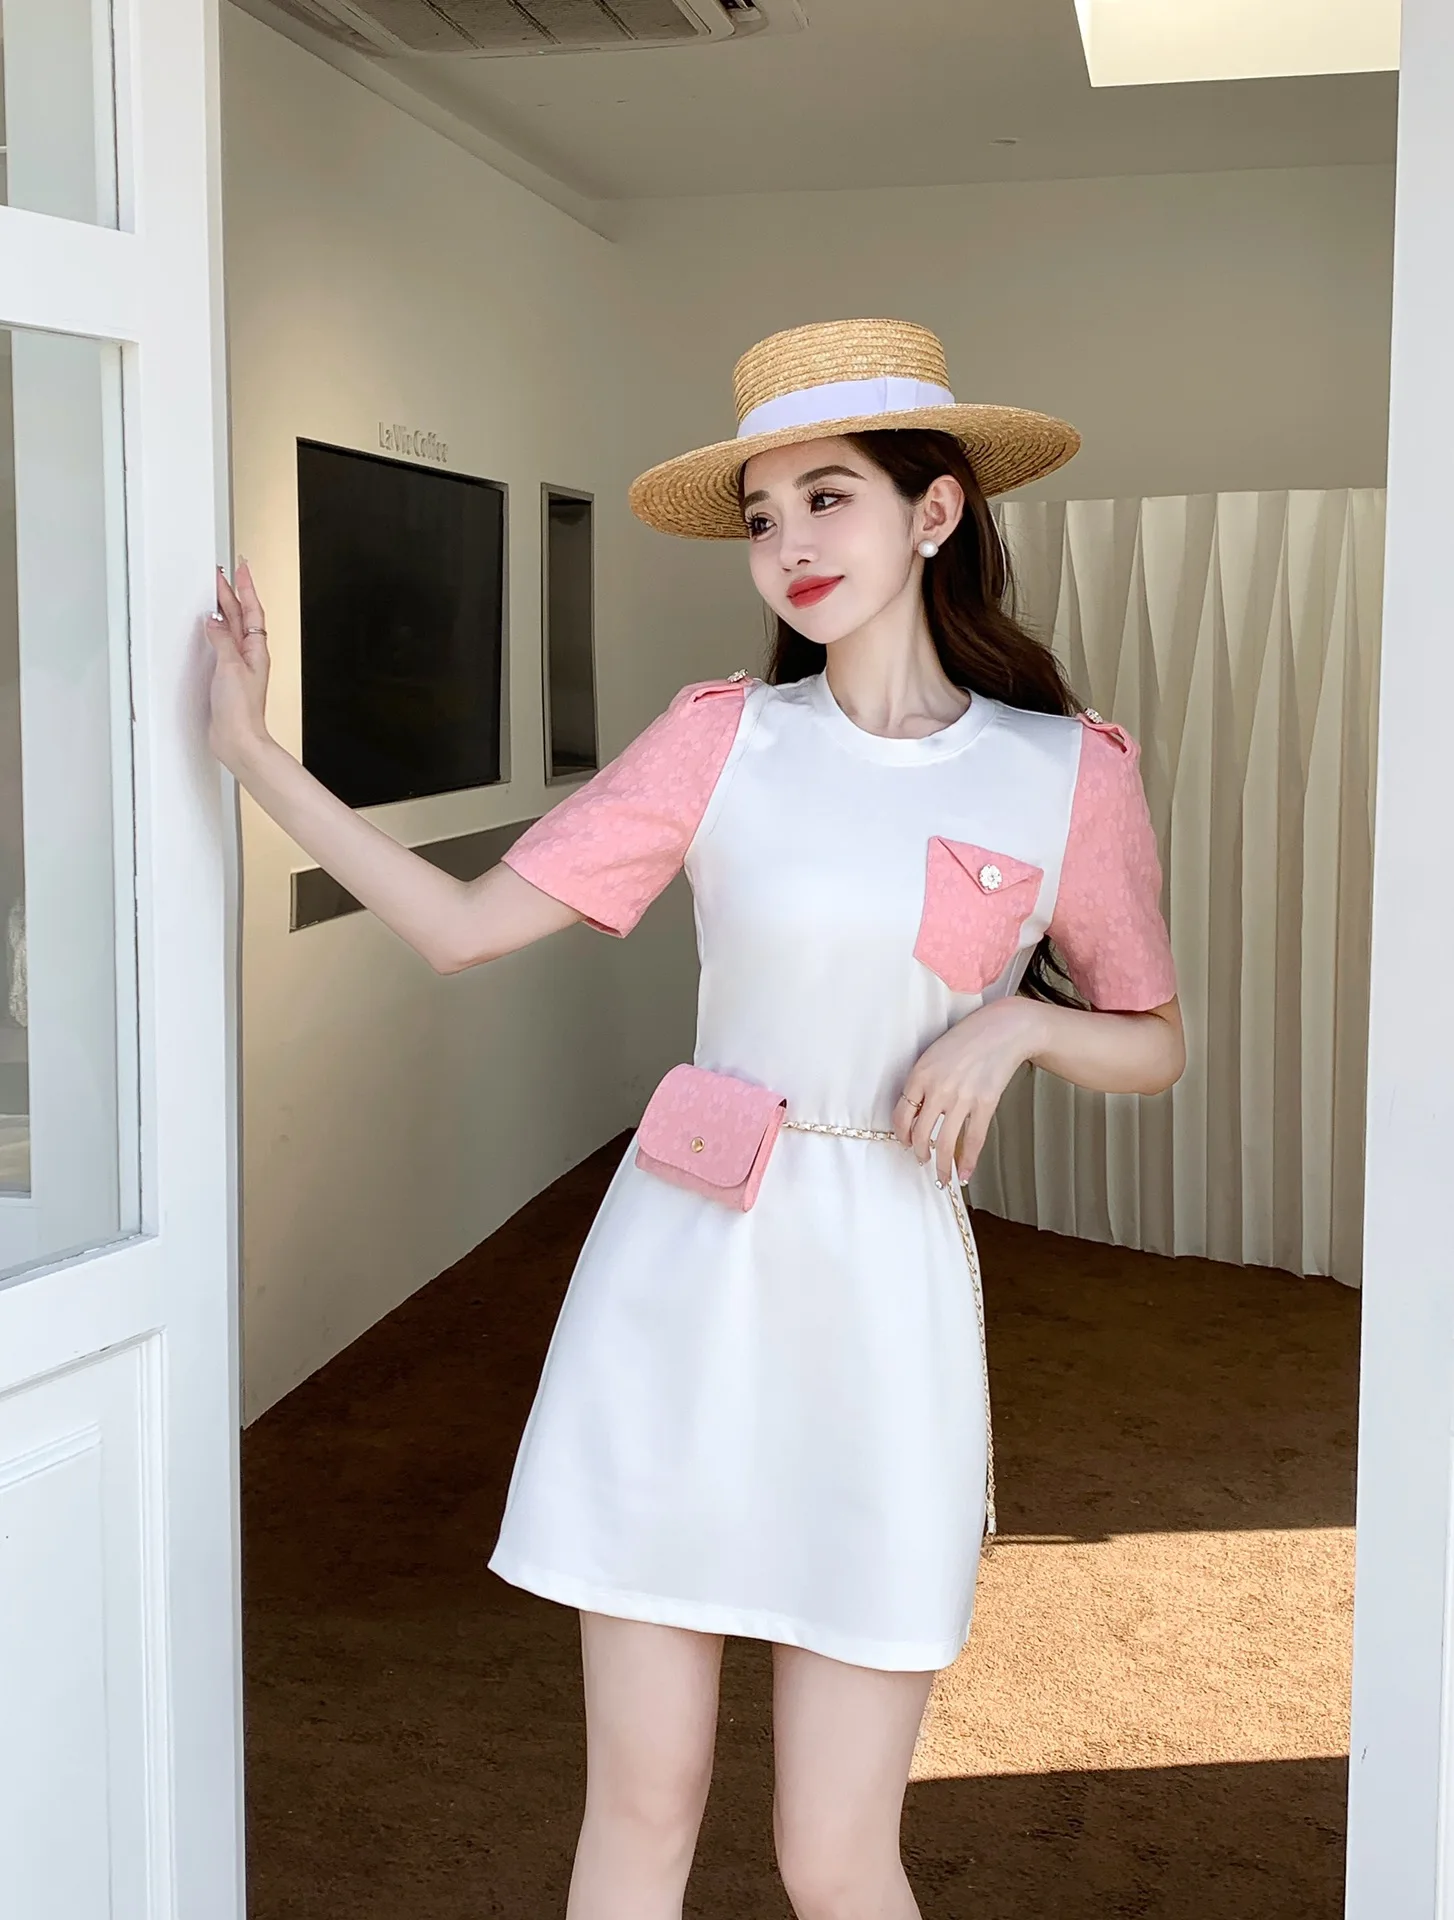 2023 spring and summer women's clothing fashion new Contrasting-color dress 0511